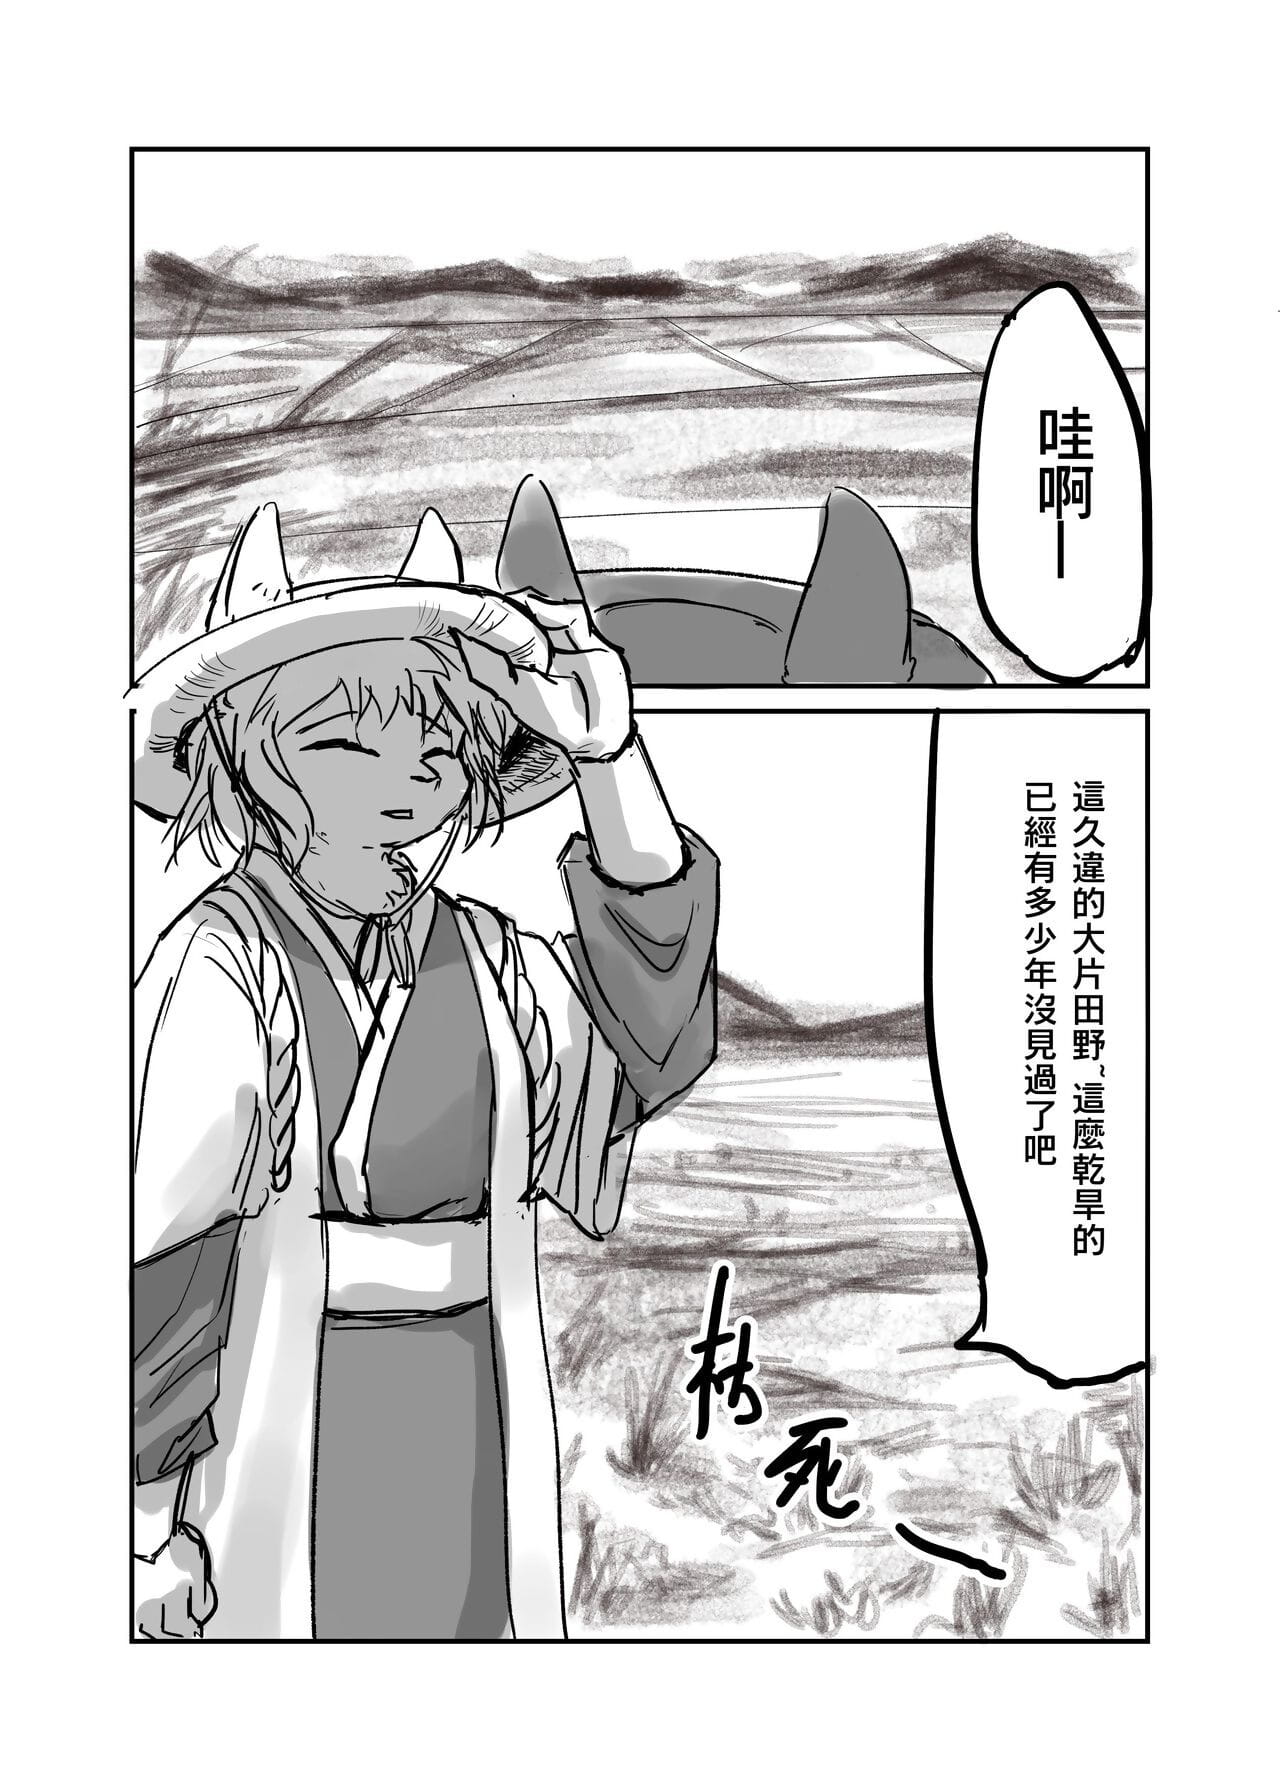 （the visitante 他乡之人 by：鬼流 page 1